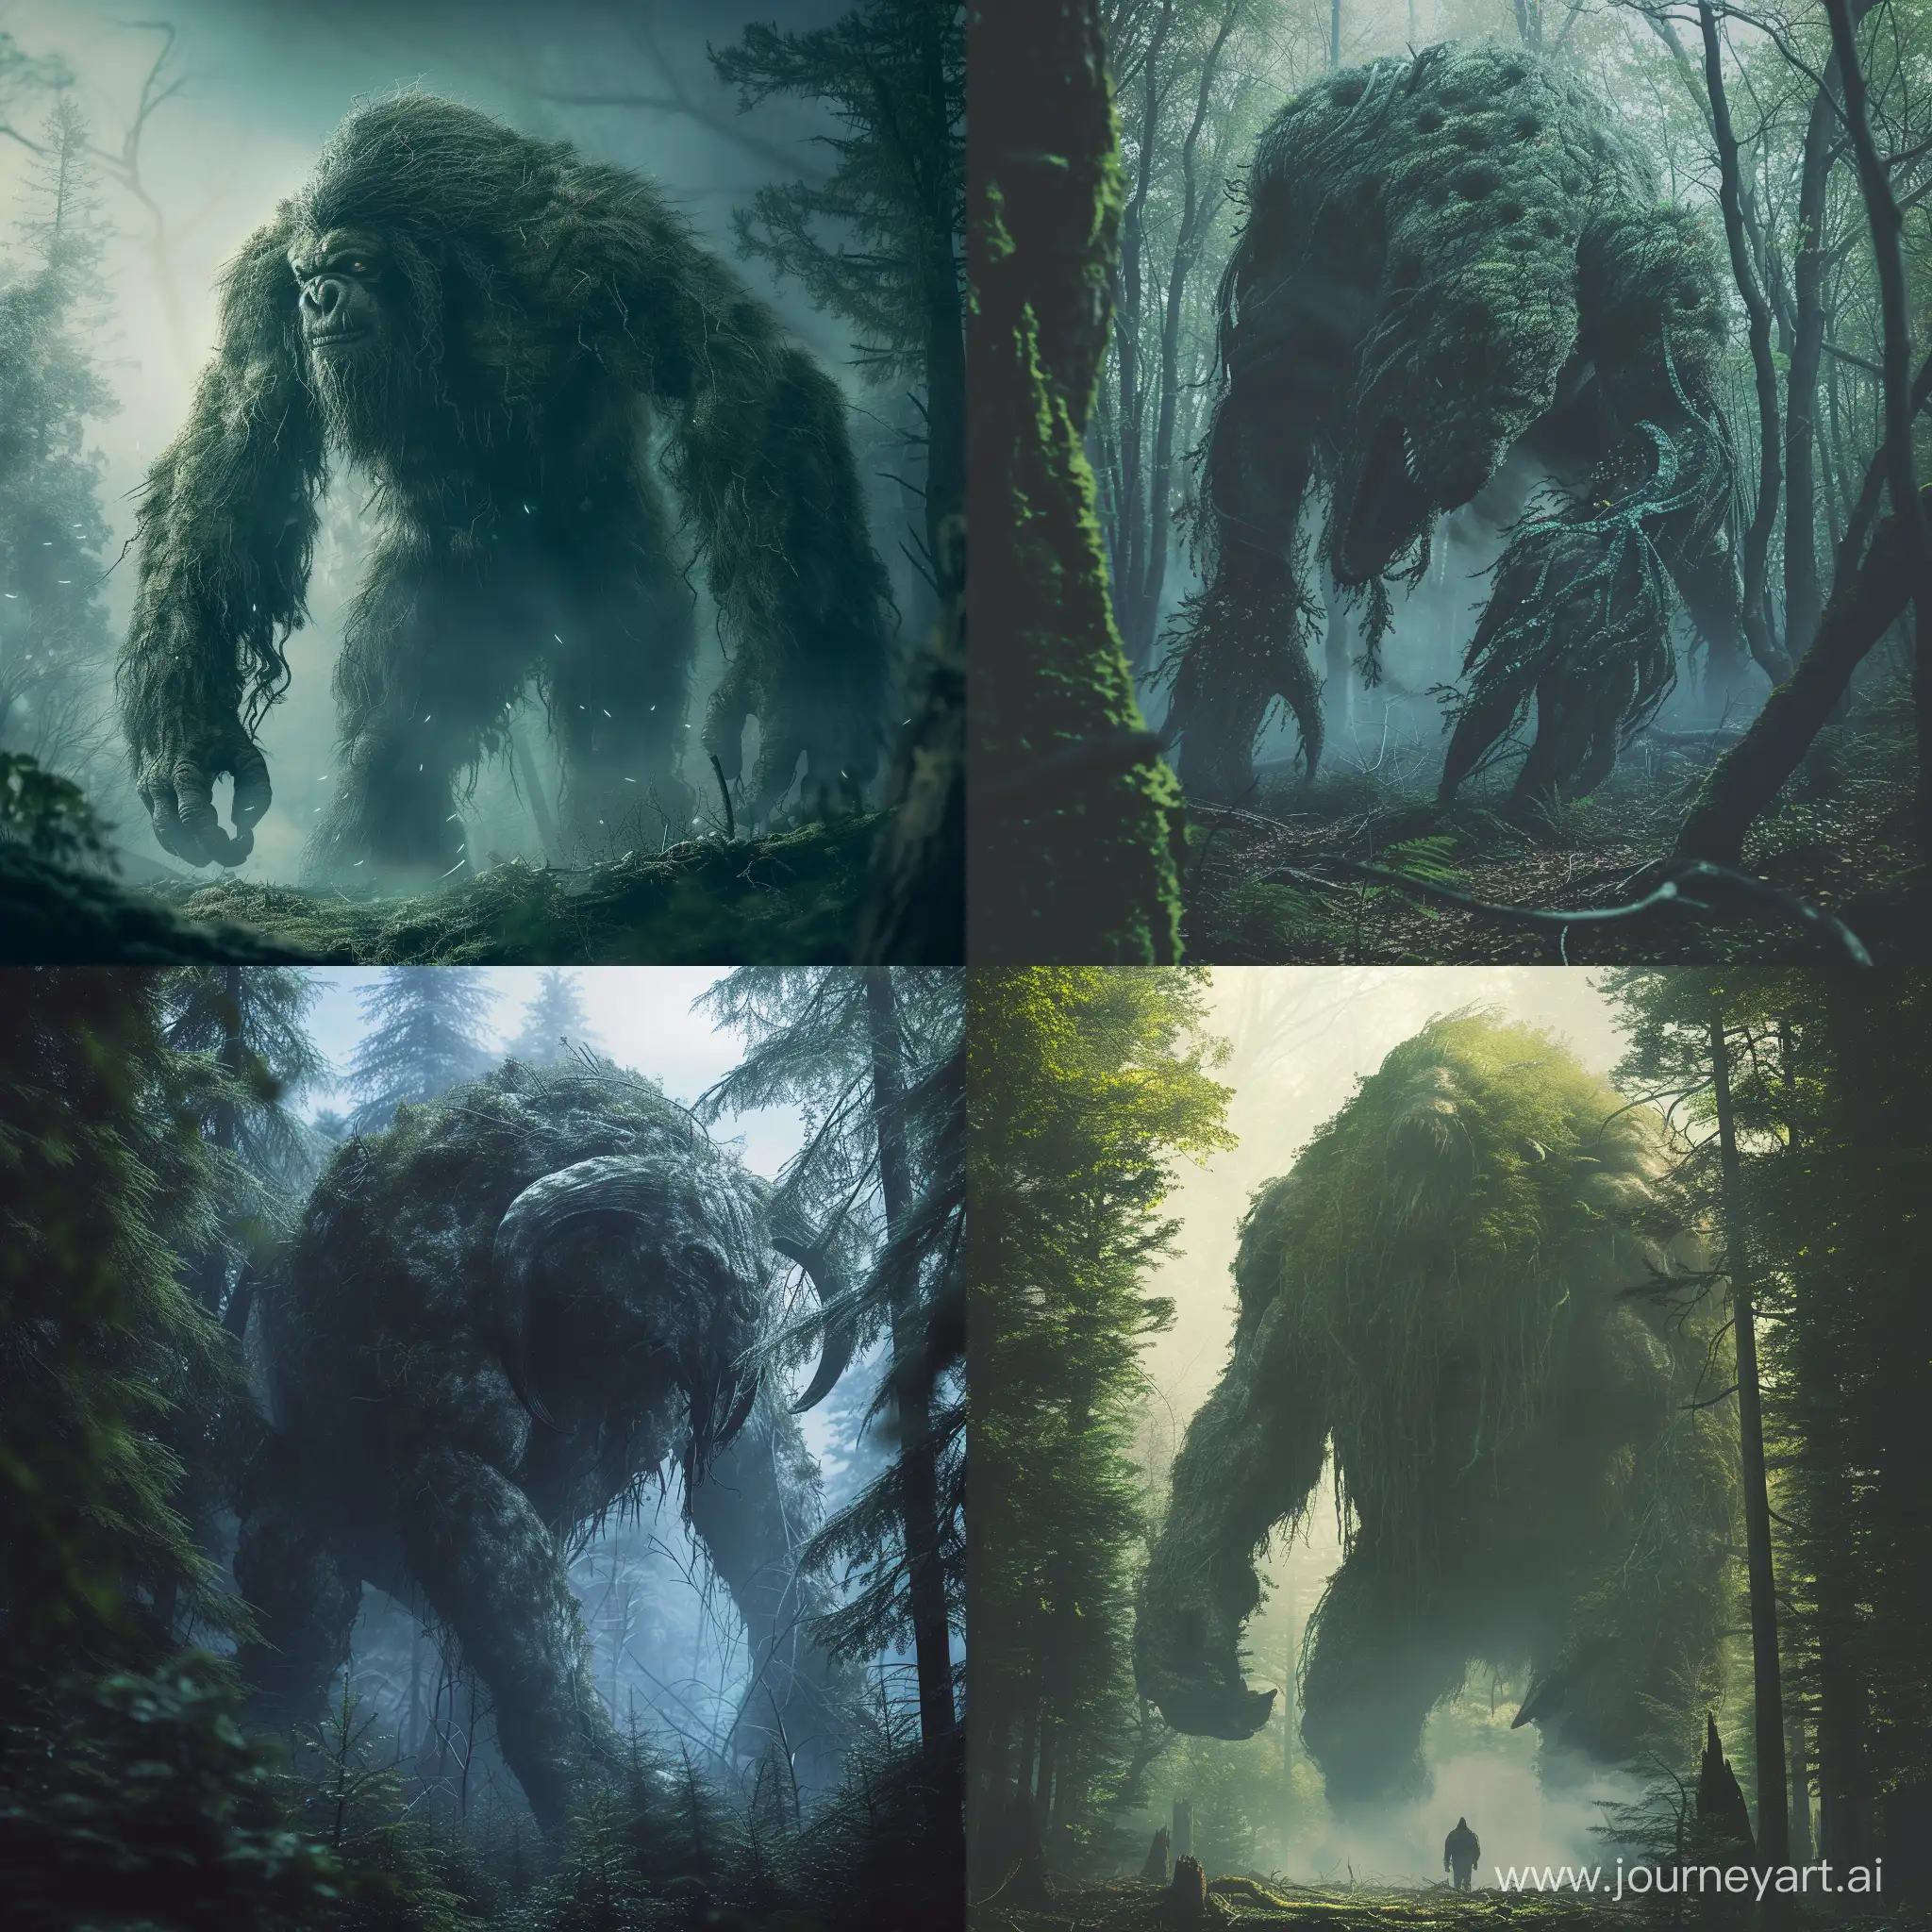 Enchanting-Forest-Dweller-Majestic-Giant-Amidst-Ancient-Trees